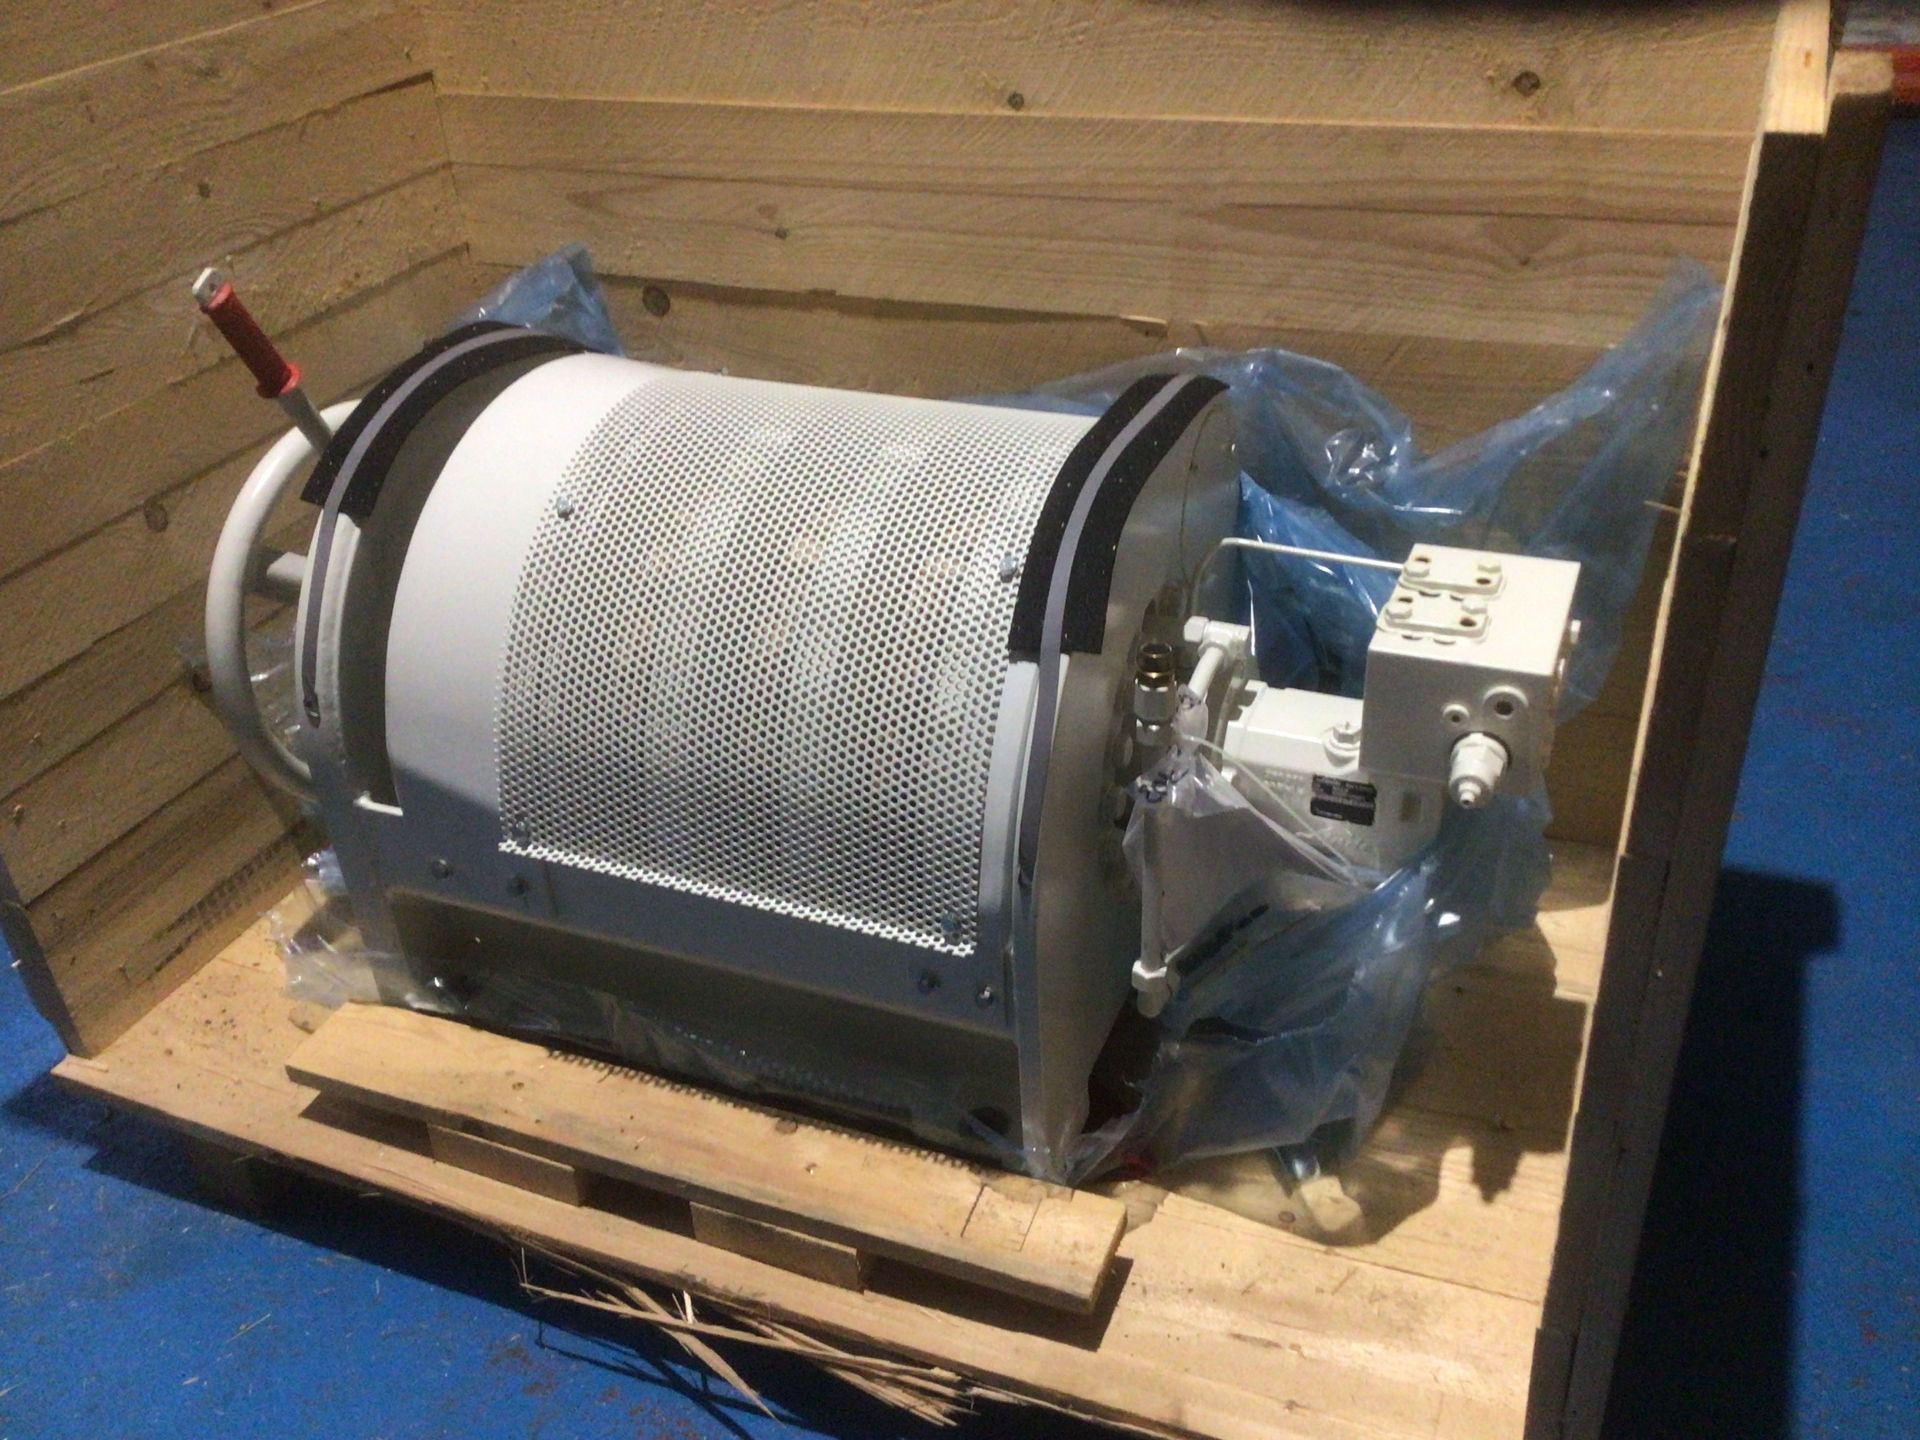 New Zollern 4.2 hydraulic ships winch - new and crated - serial number unknown